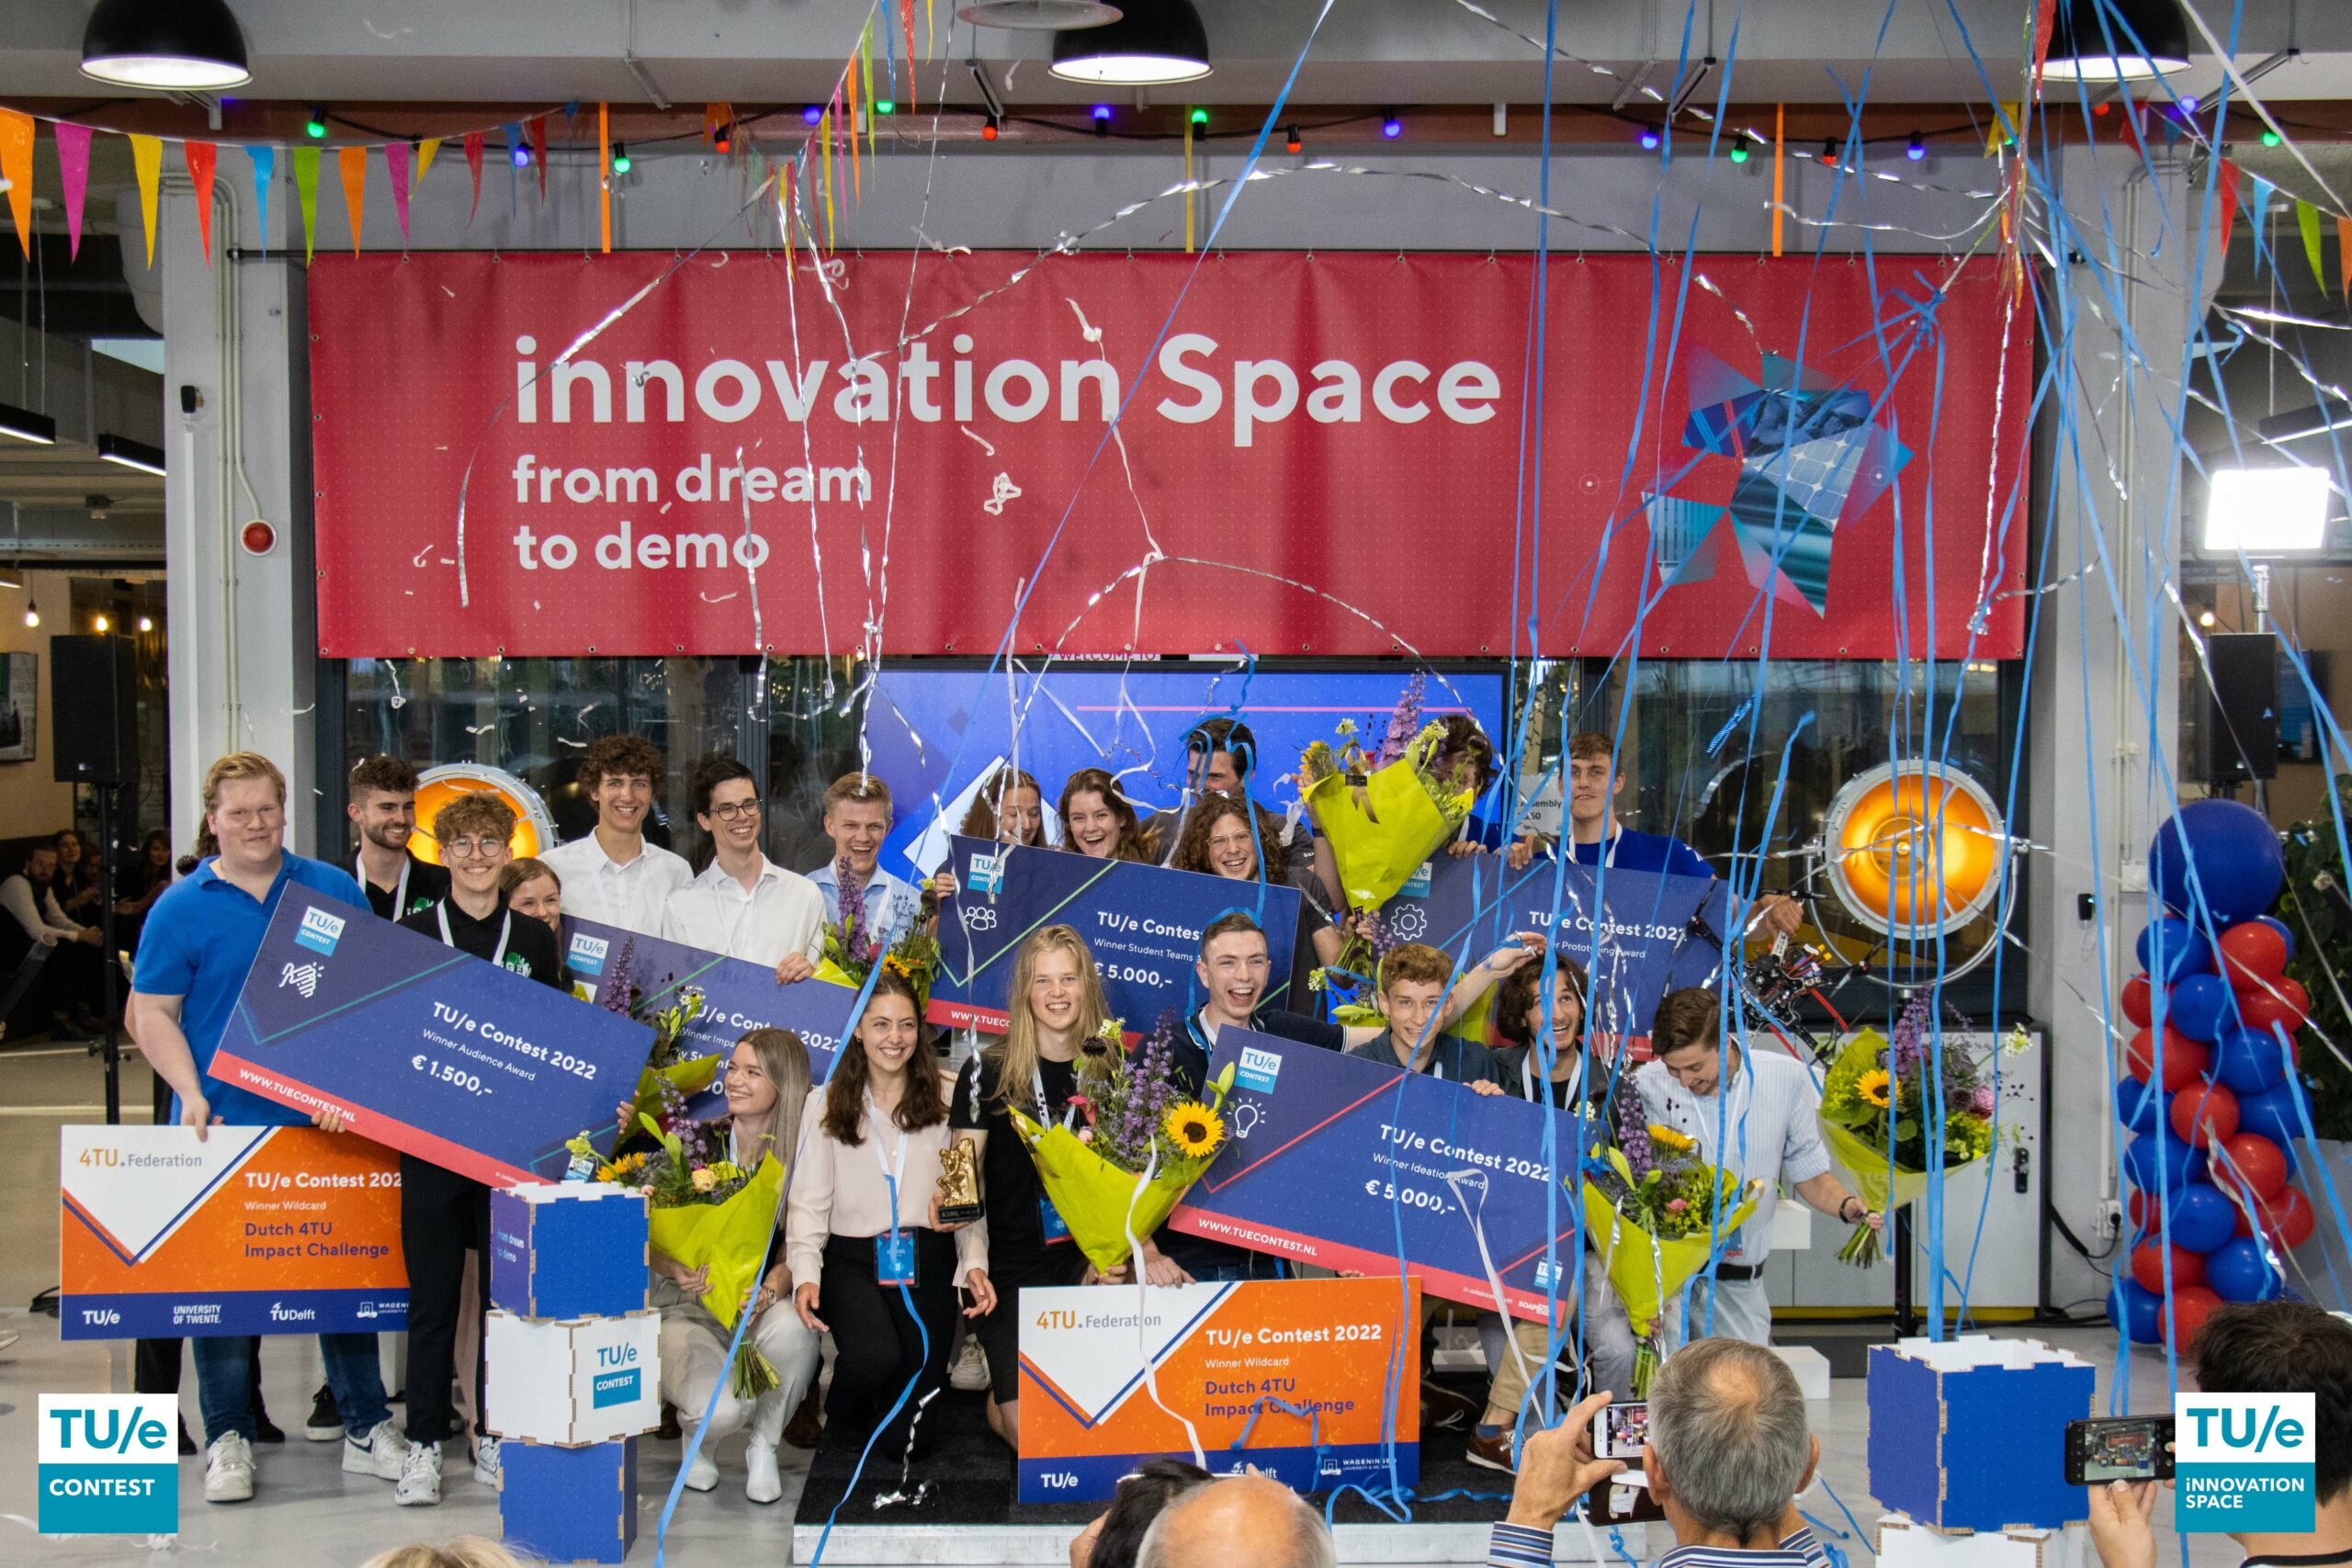 The engineers of tomorrow challenge their ideas at the TU/e Contest